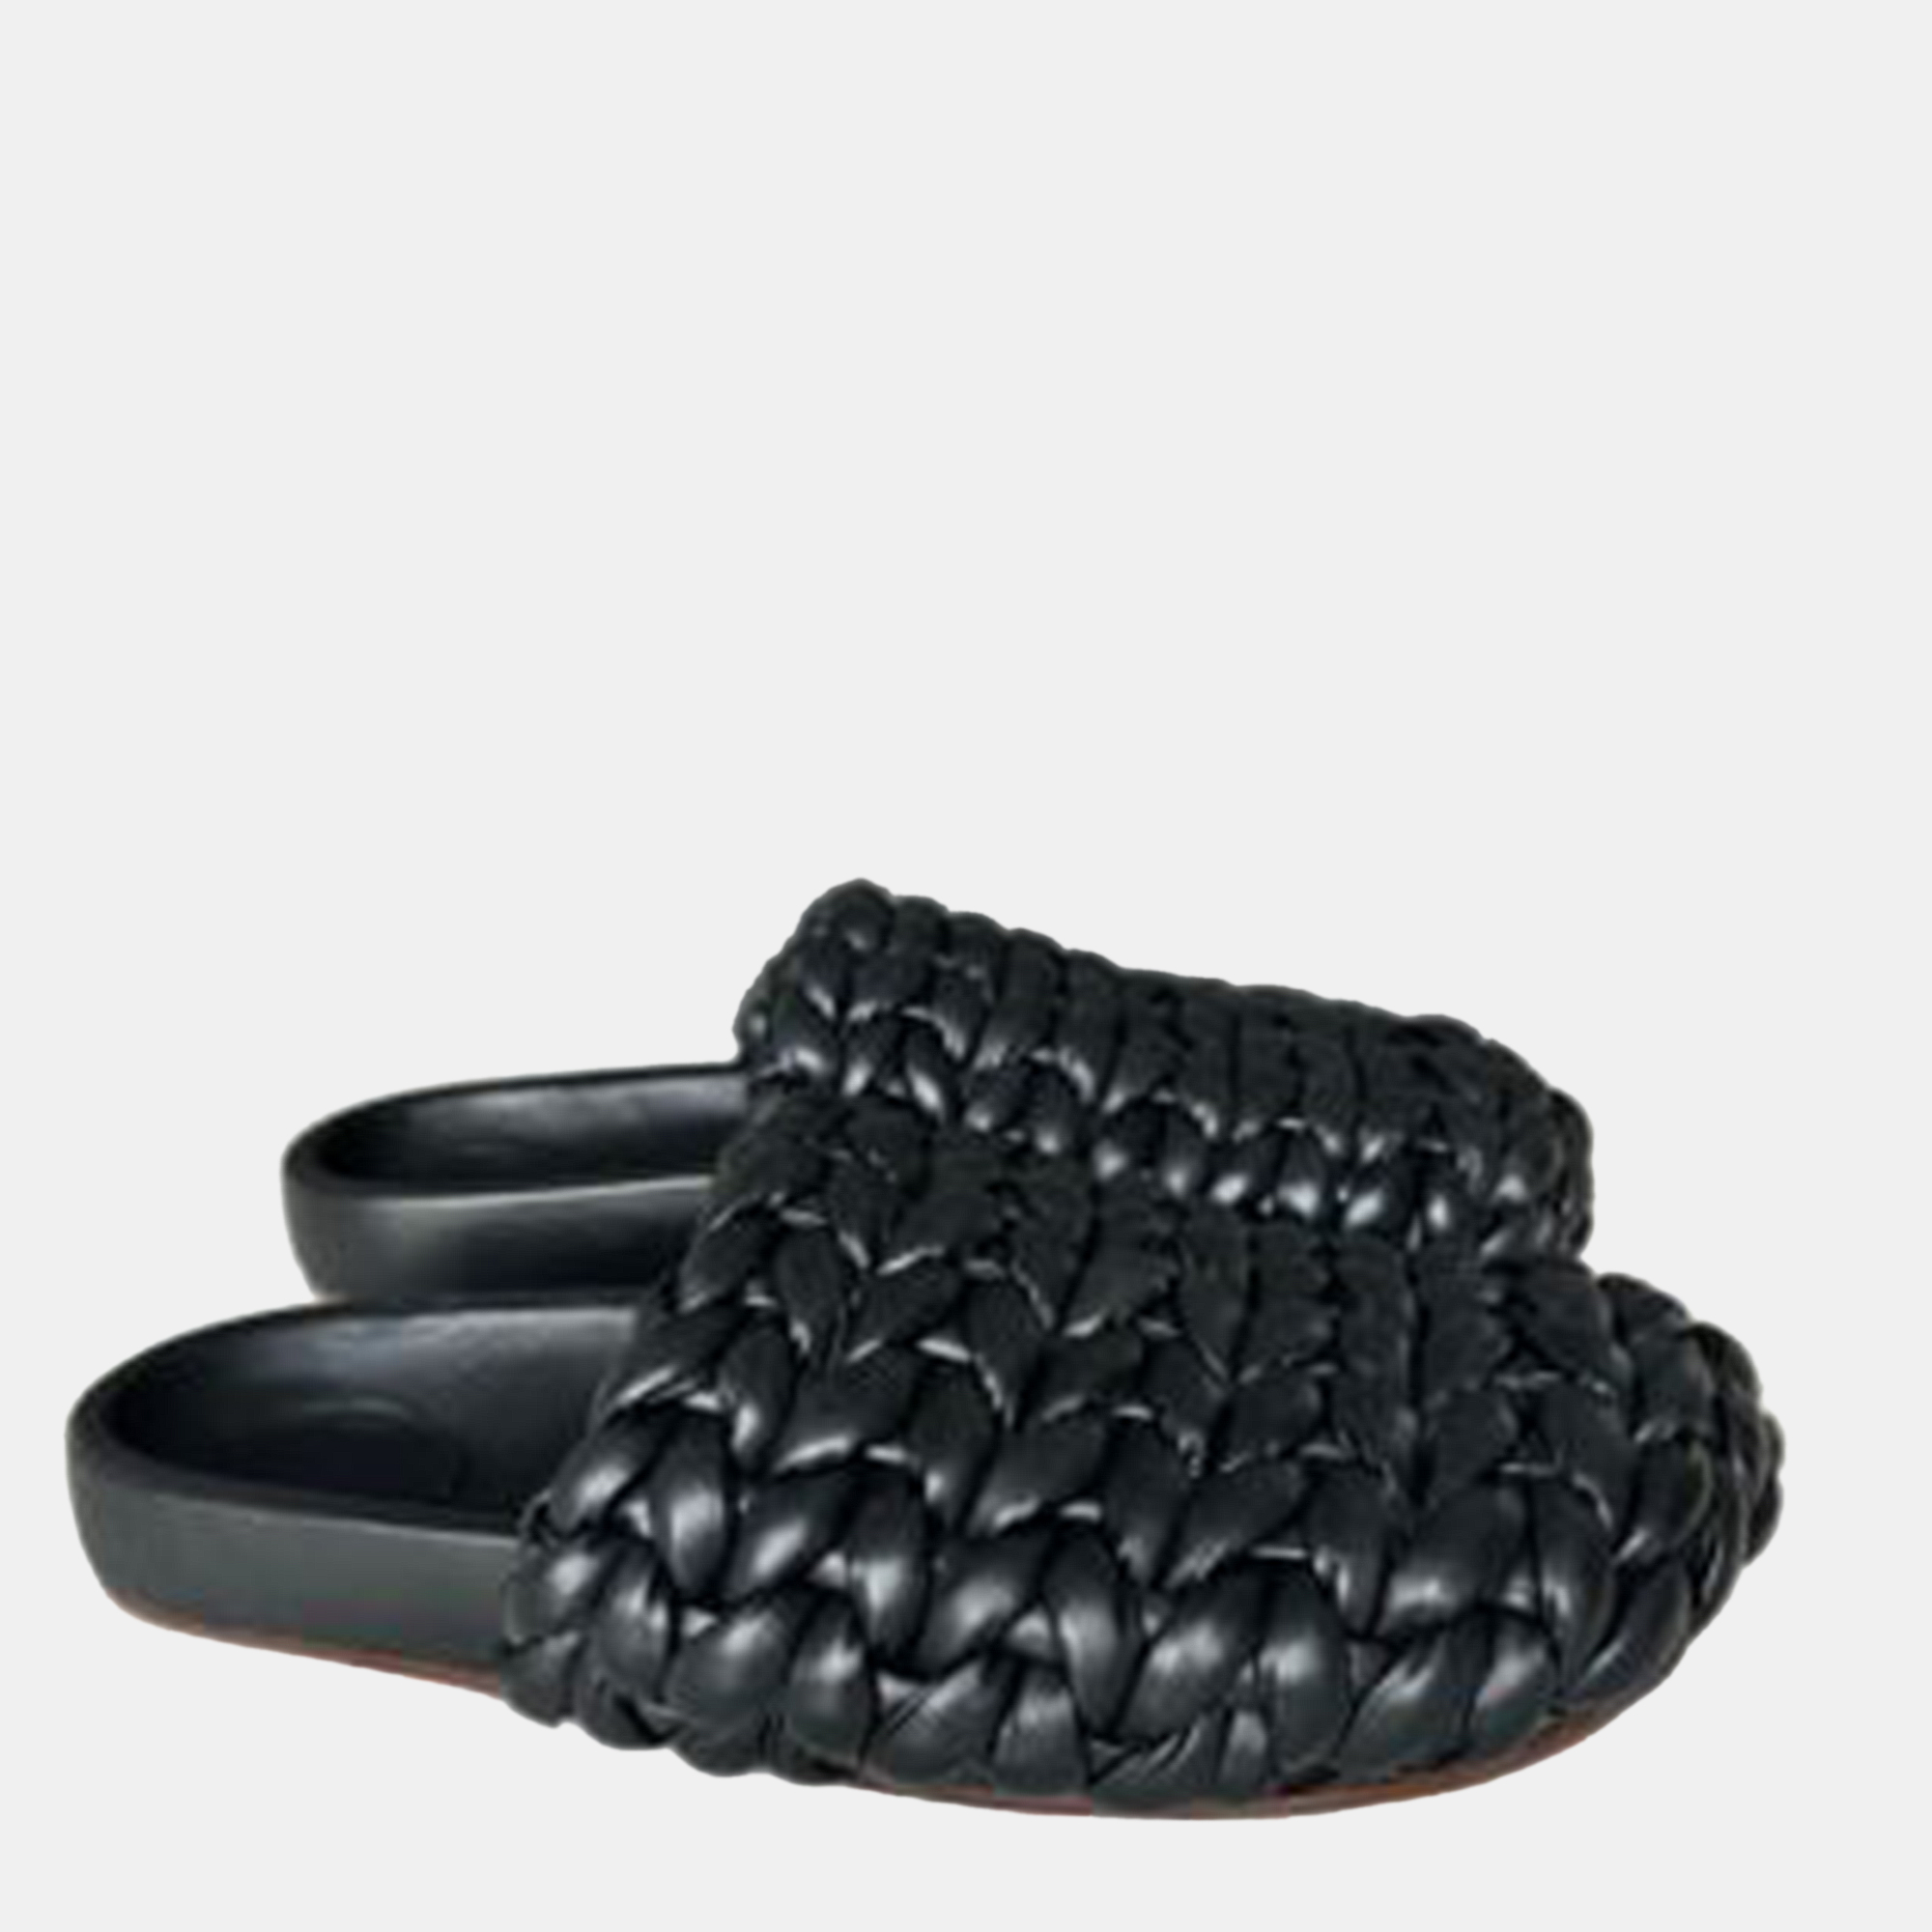 Chloè Black Leather Kacey Footbed Mules Size 41